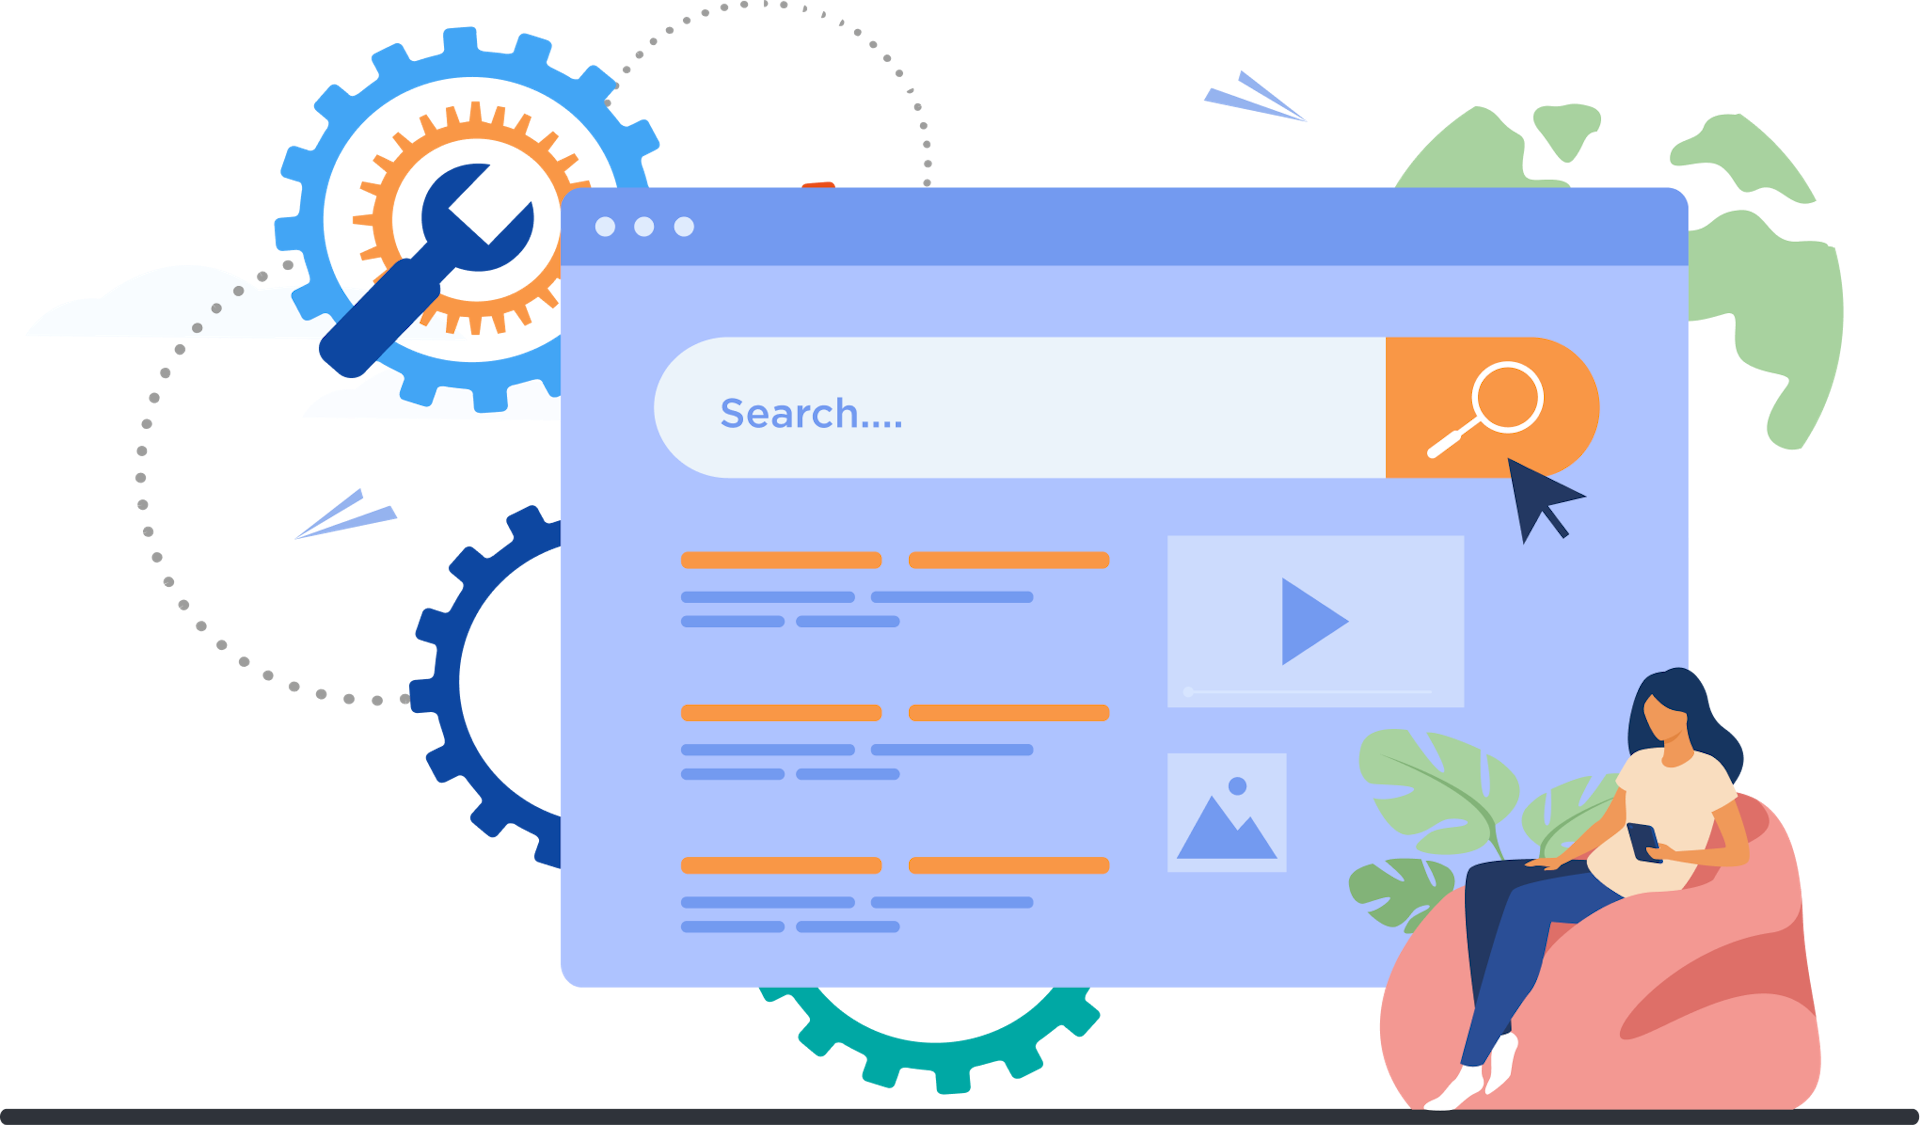 5 Best Practices for Building a Flight Search Engine